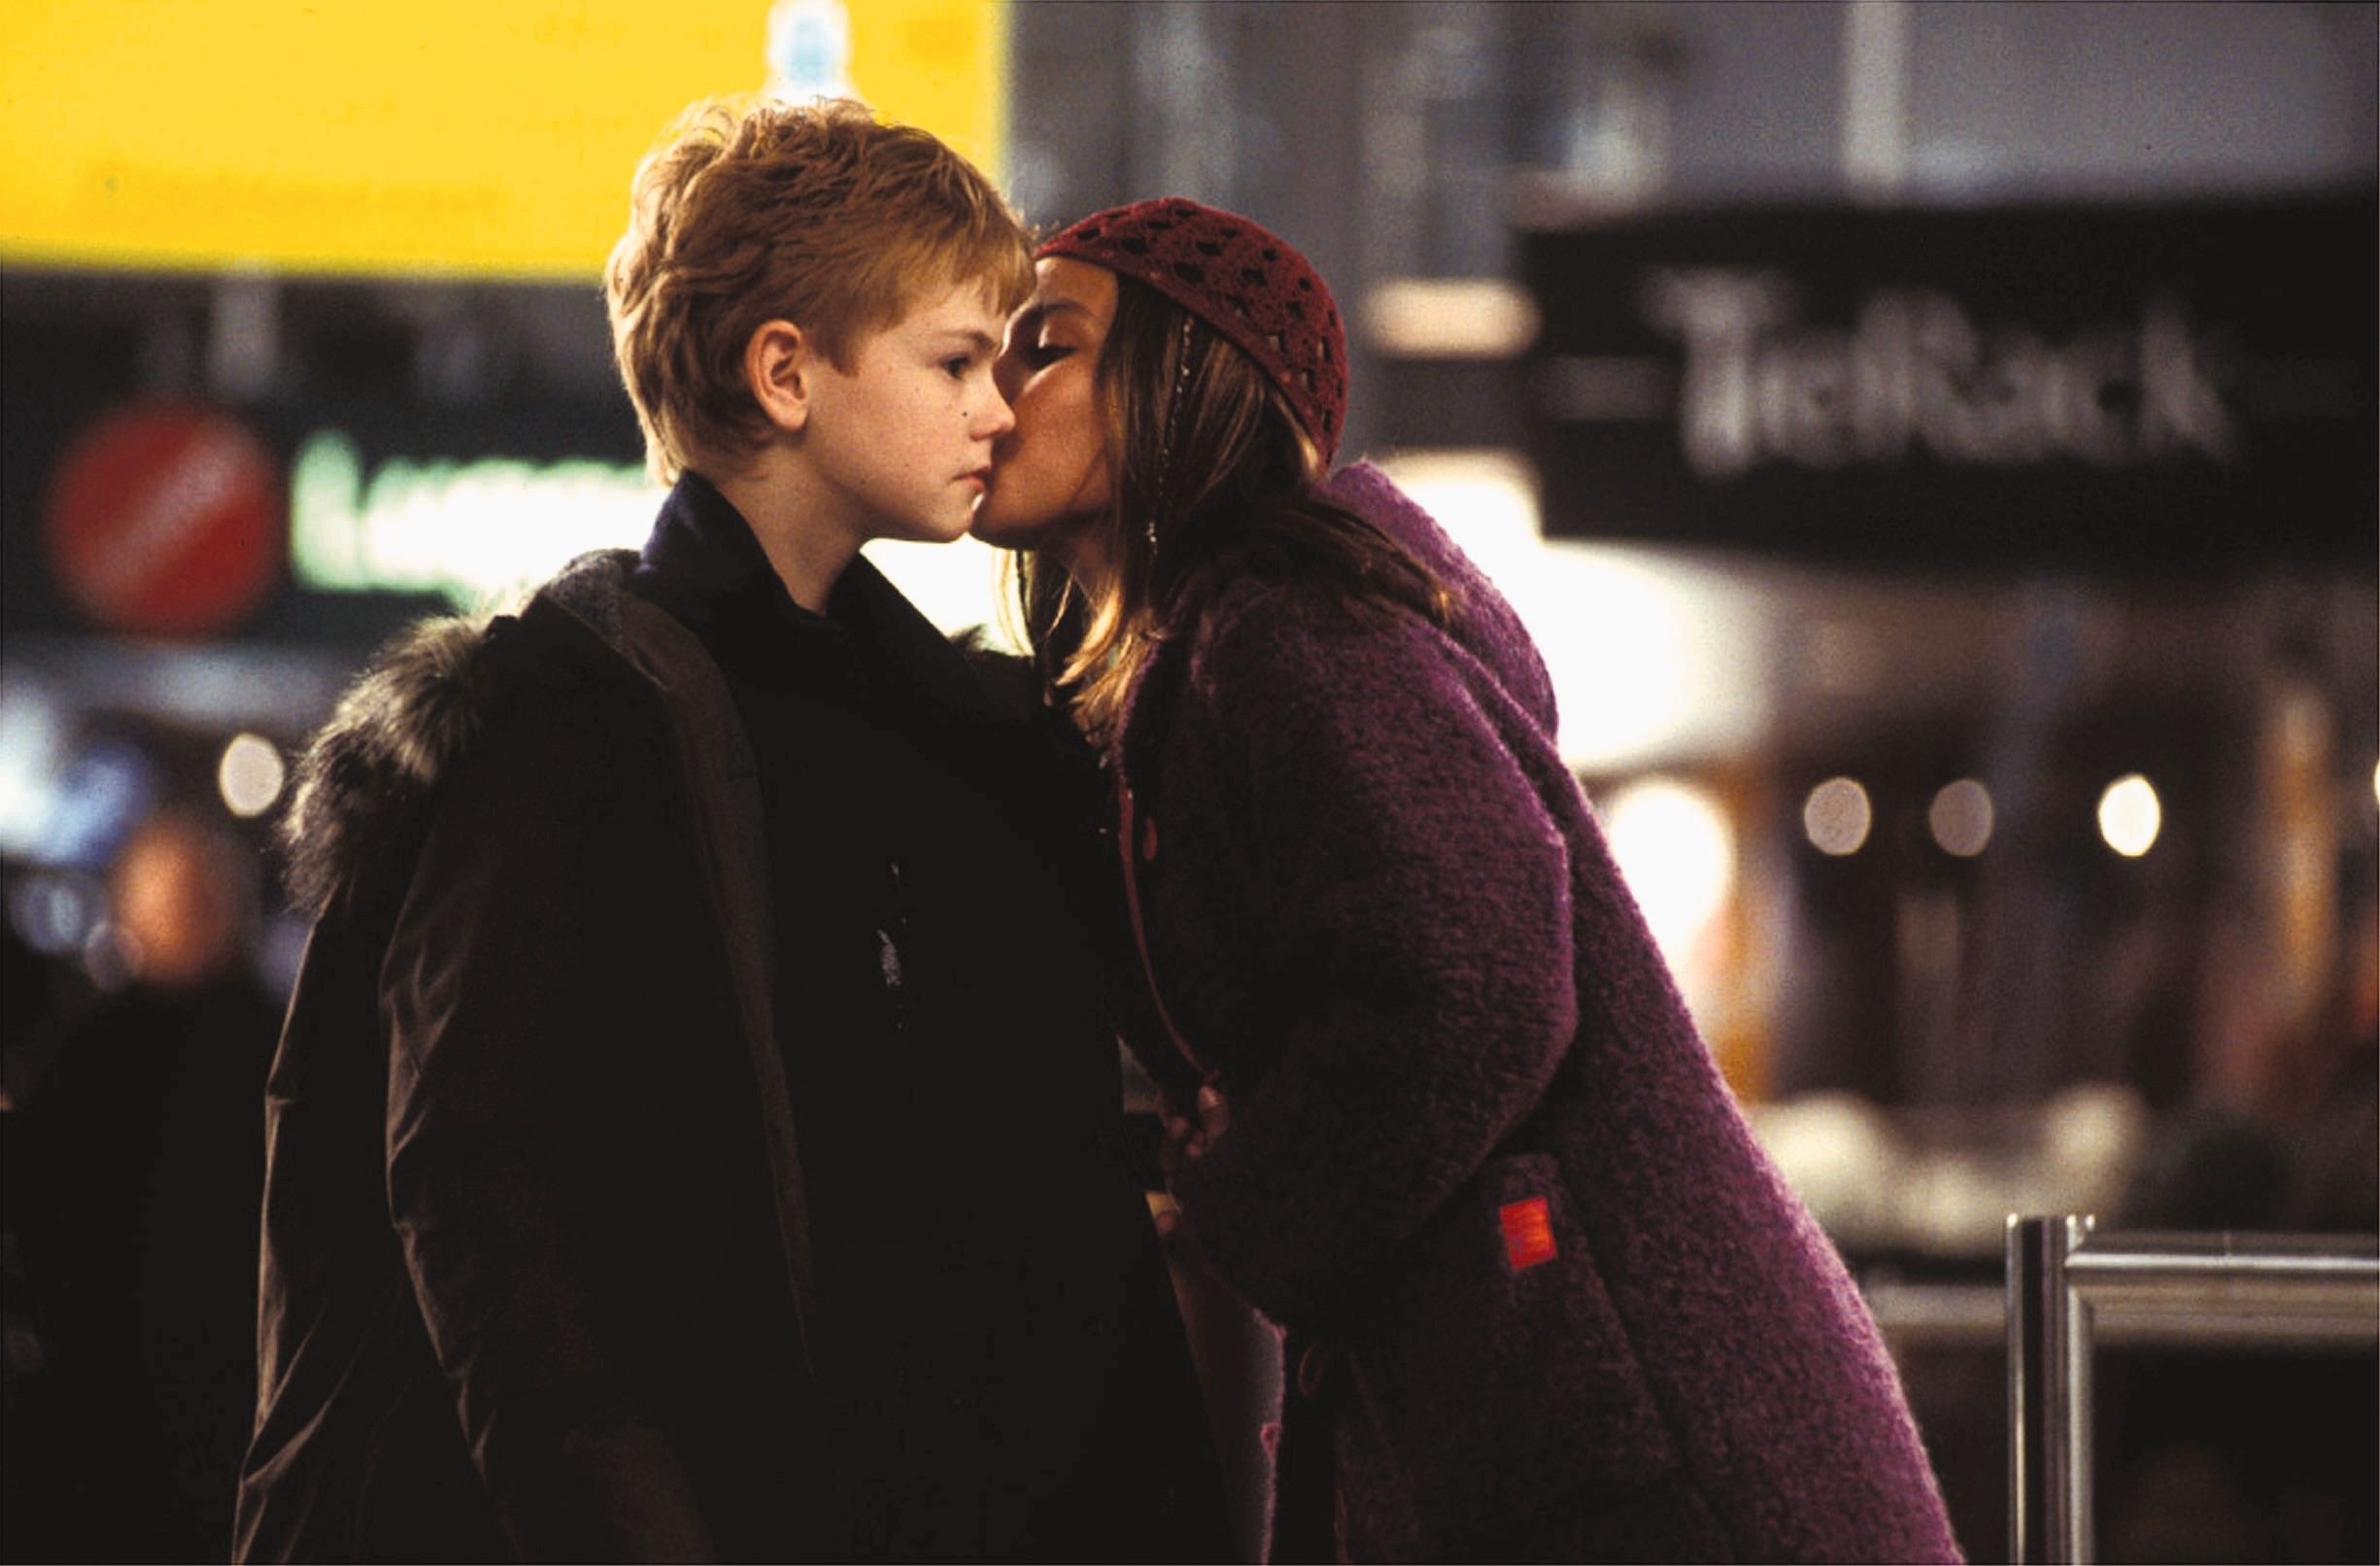 Olivia Olson as Joanna kissing Thomas in &quot;Love Actually&quot;